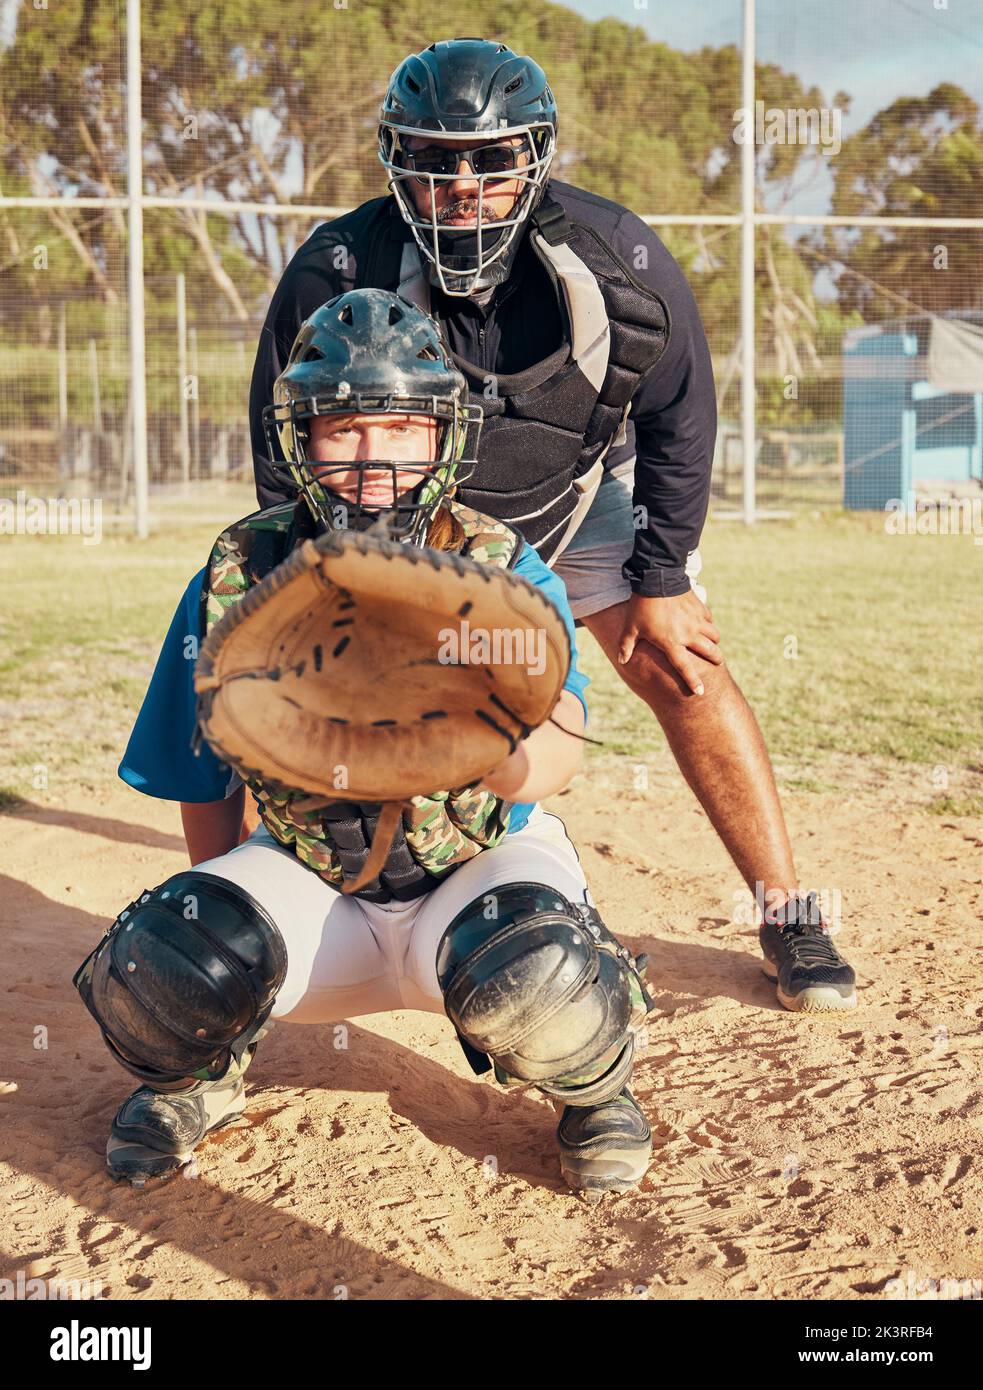 Baseball, sport and training with a sports man or catcher on a field for fitness and exercise outdoor during summer. Workout, health and focus with a Stock Photo